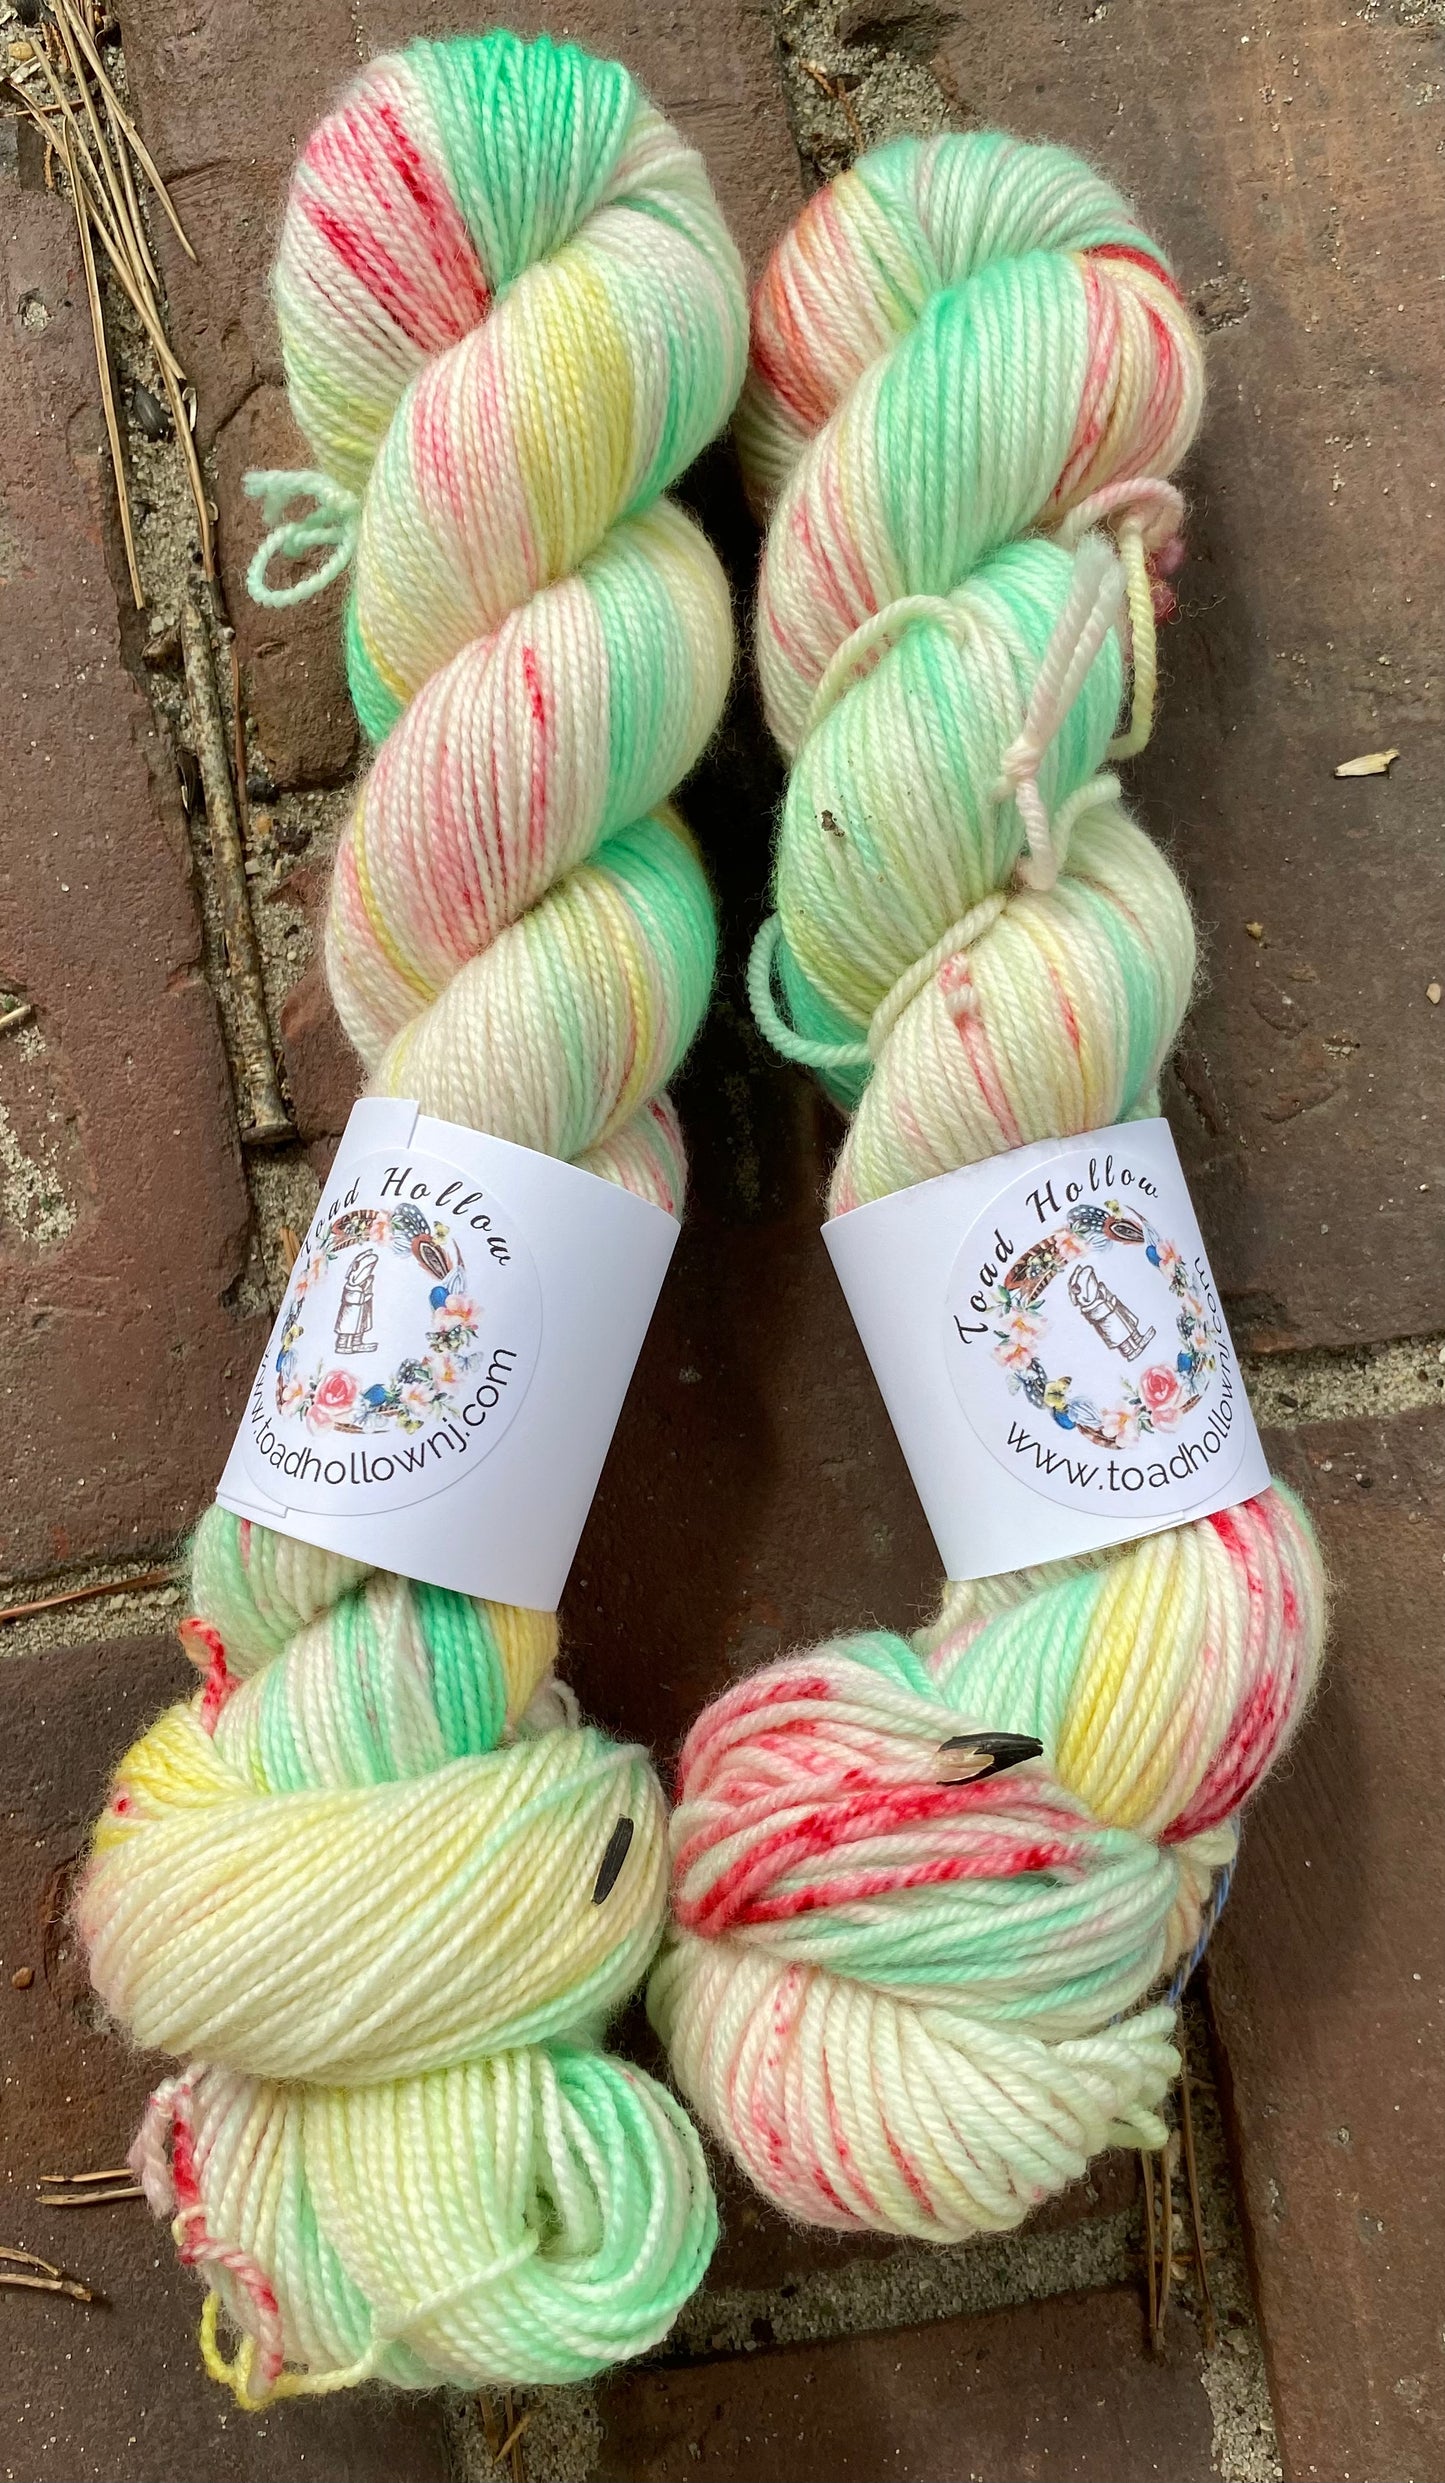 BEACH READS from the Beach Reads Collection, Toad Hollow Yarns